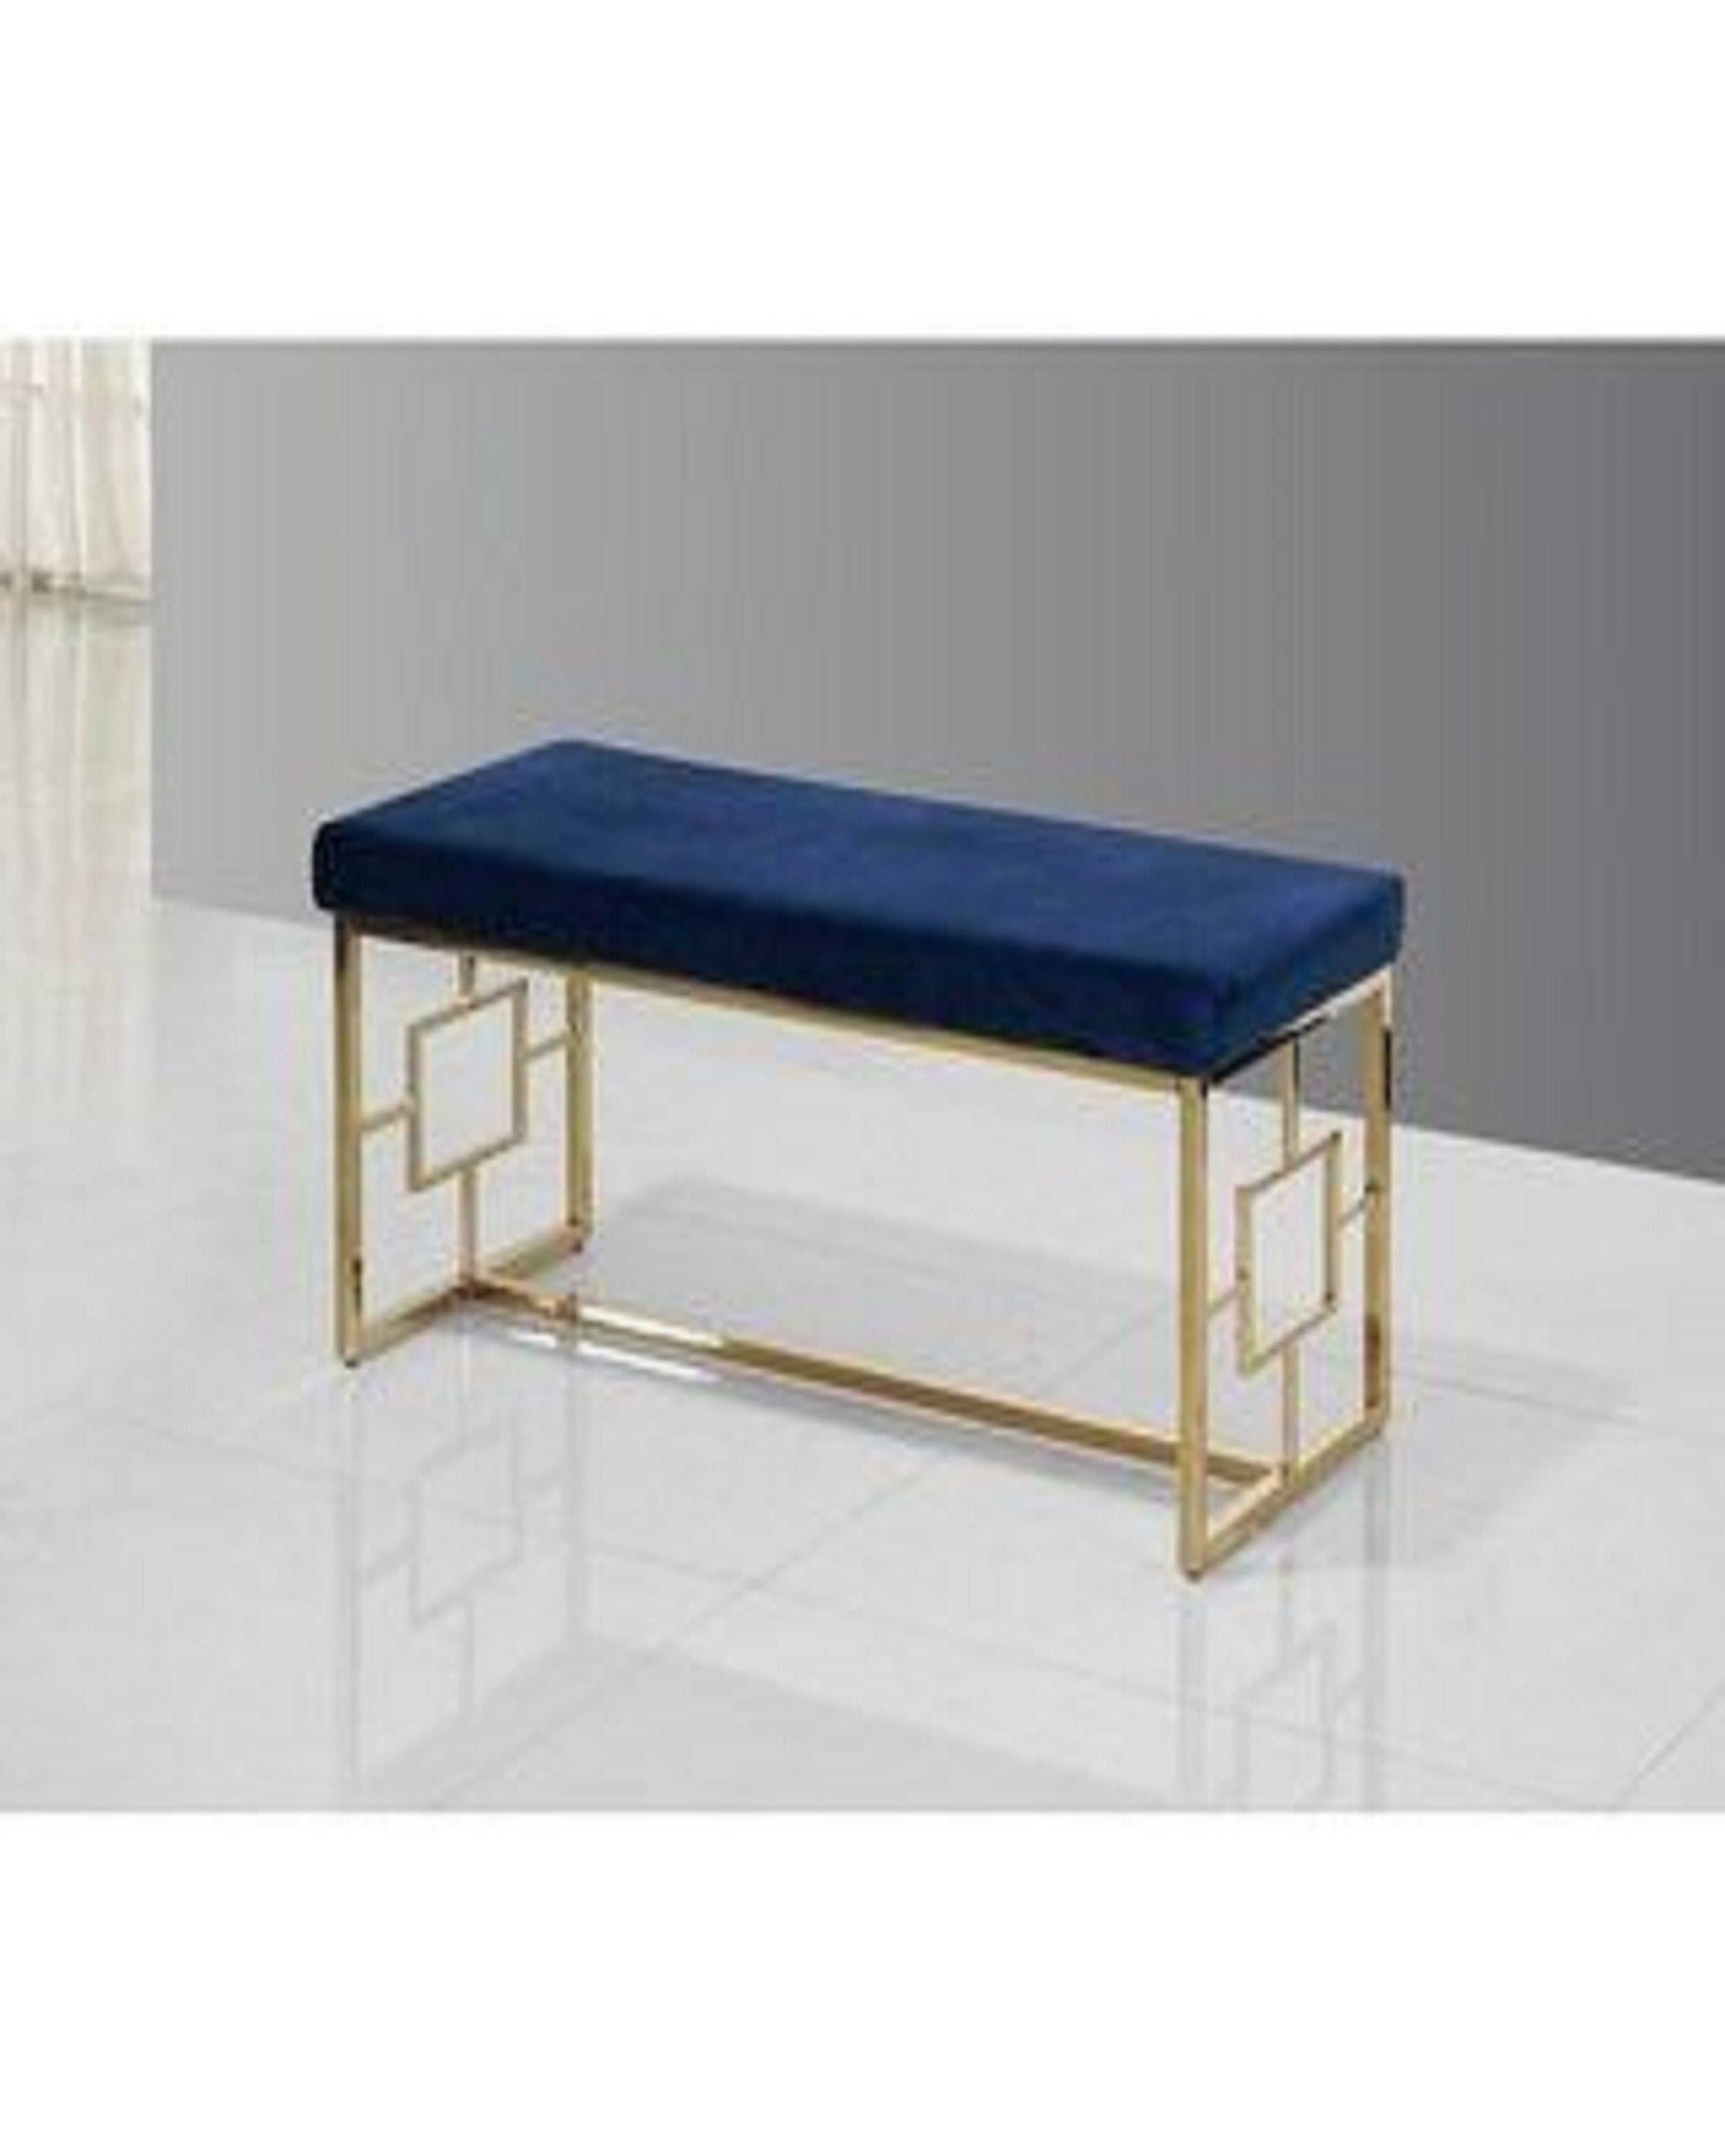 Luxury Green with gold leaf bench